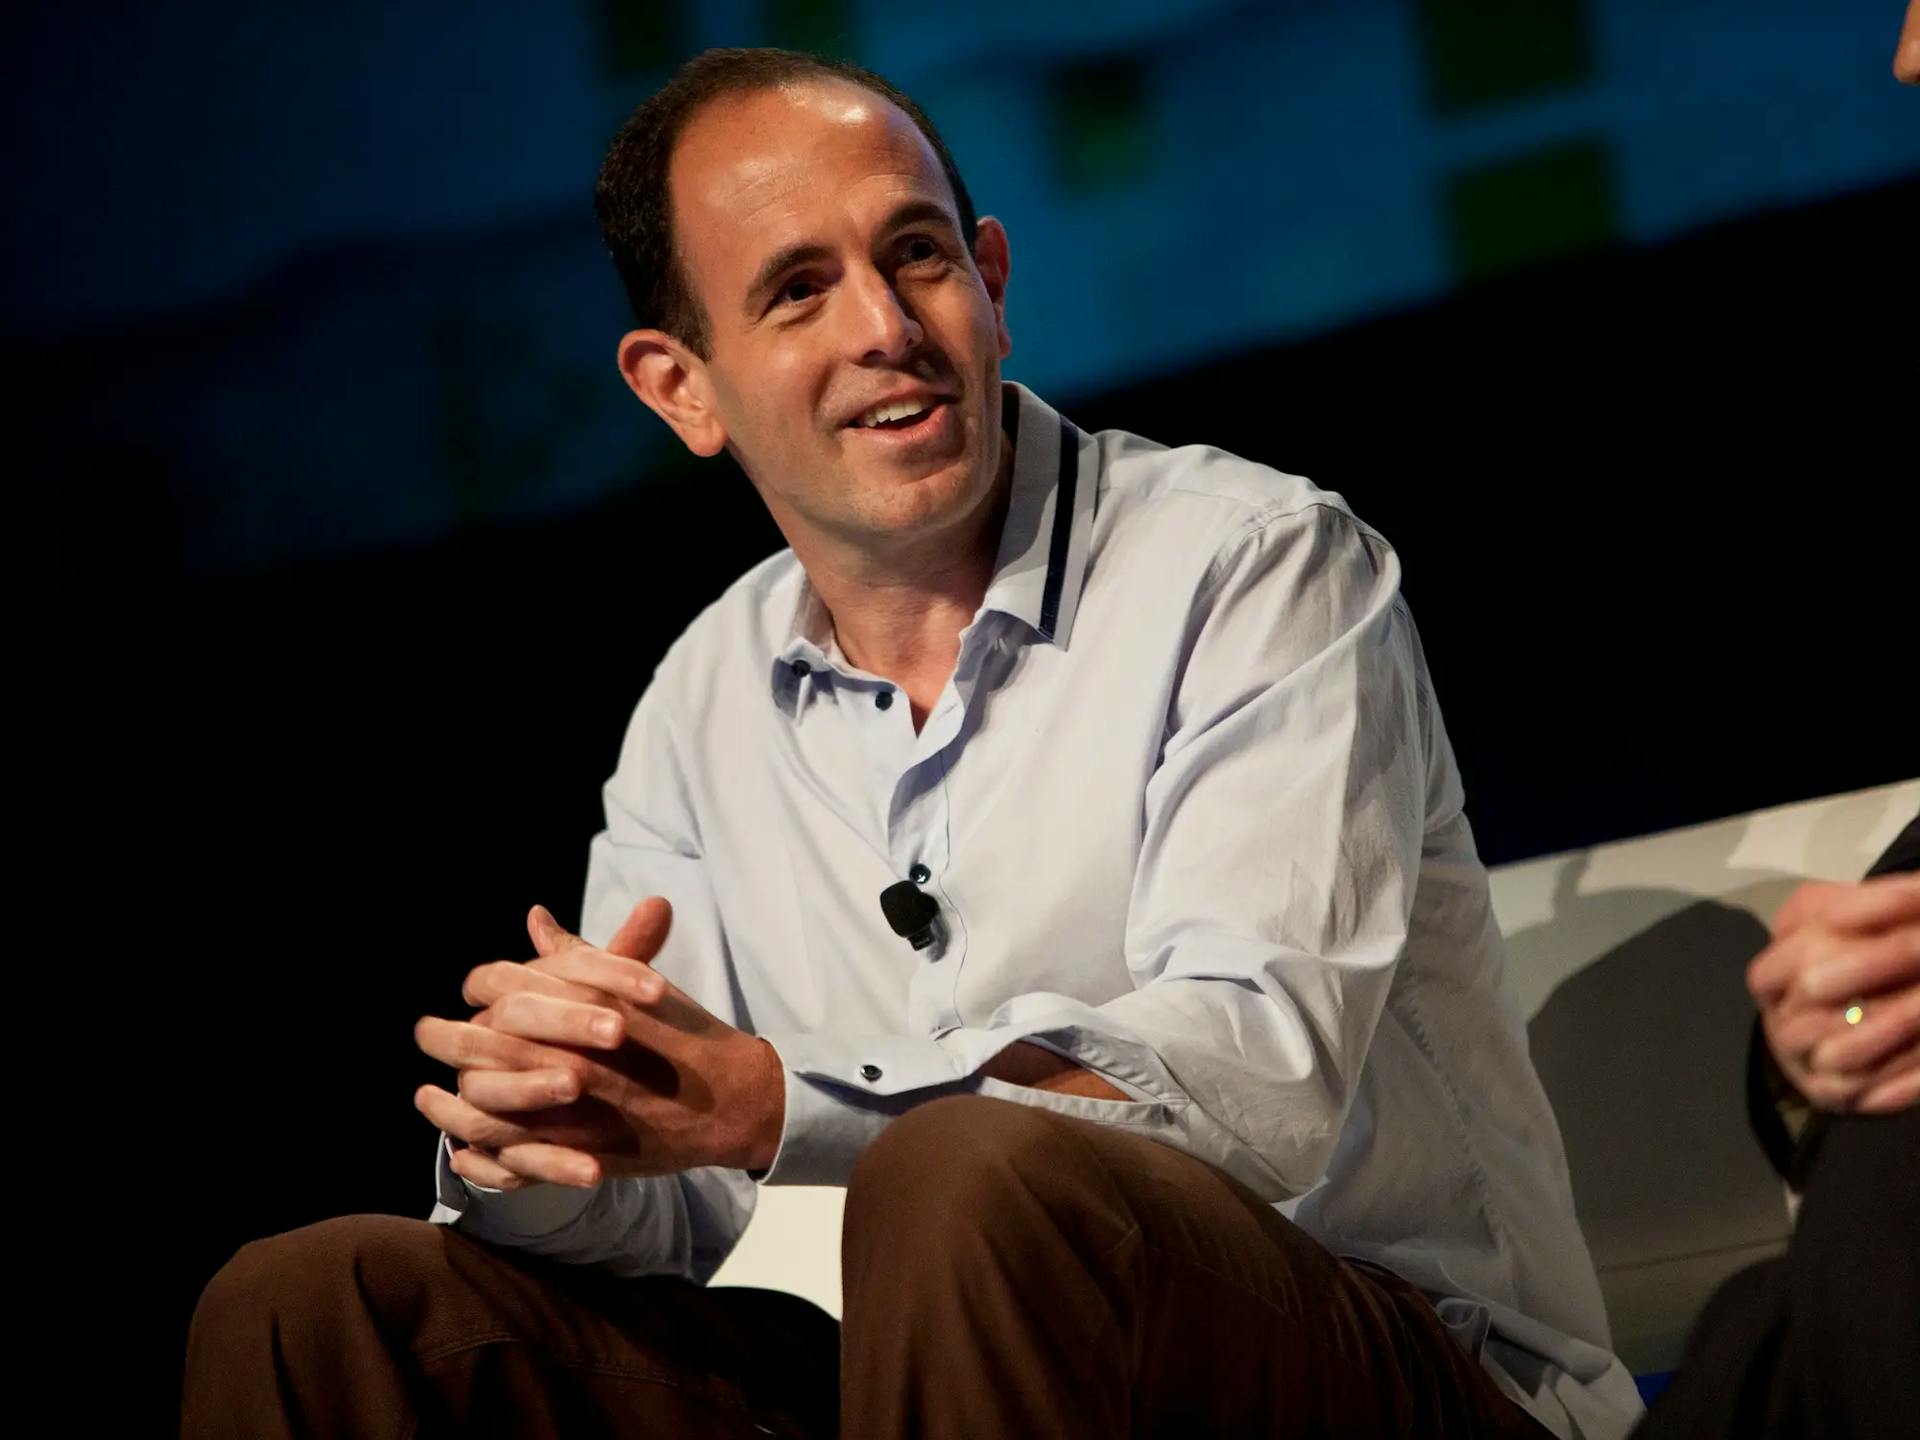 OpenStore CEO Keith Rabois at a panel talk